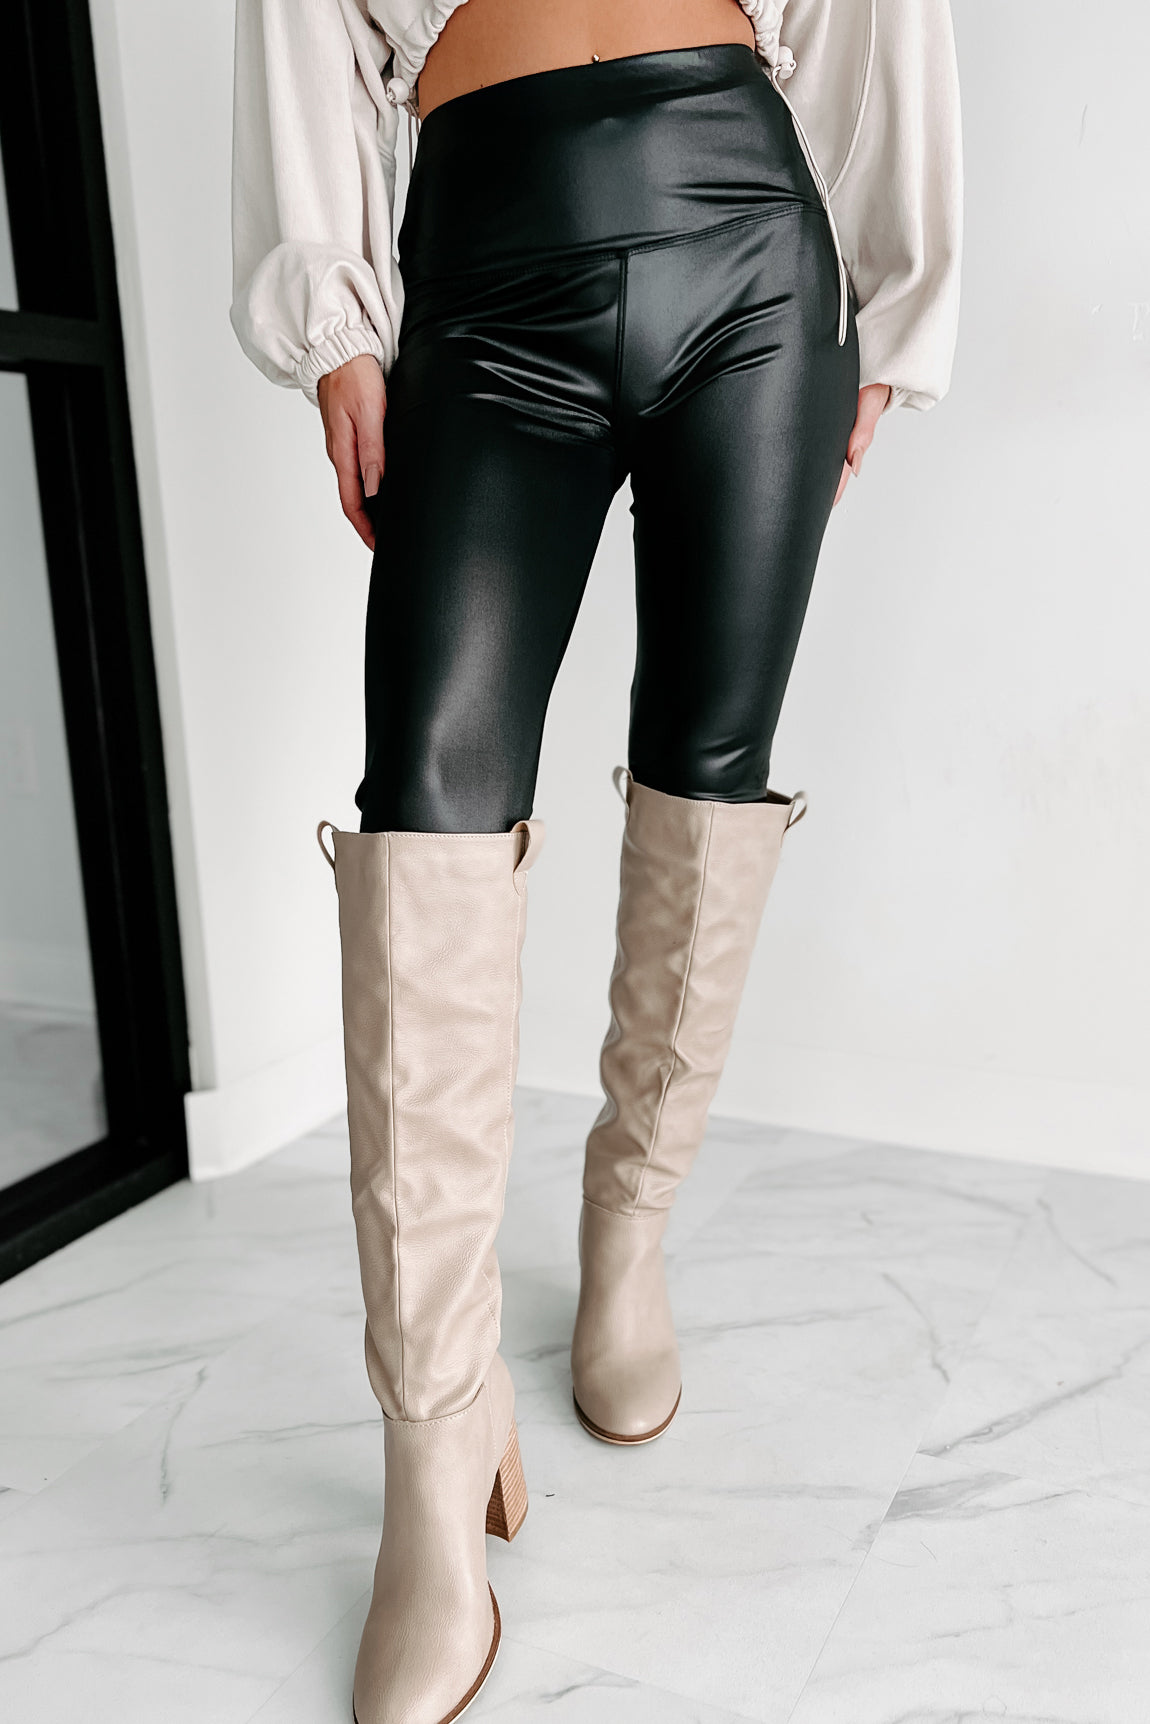 Leather Leggings- The Do's and Don'ts